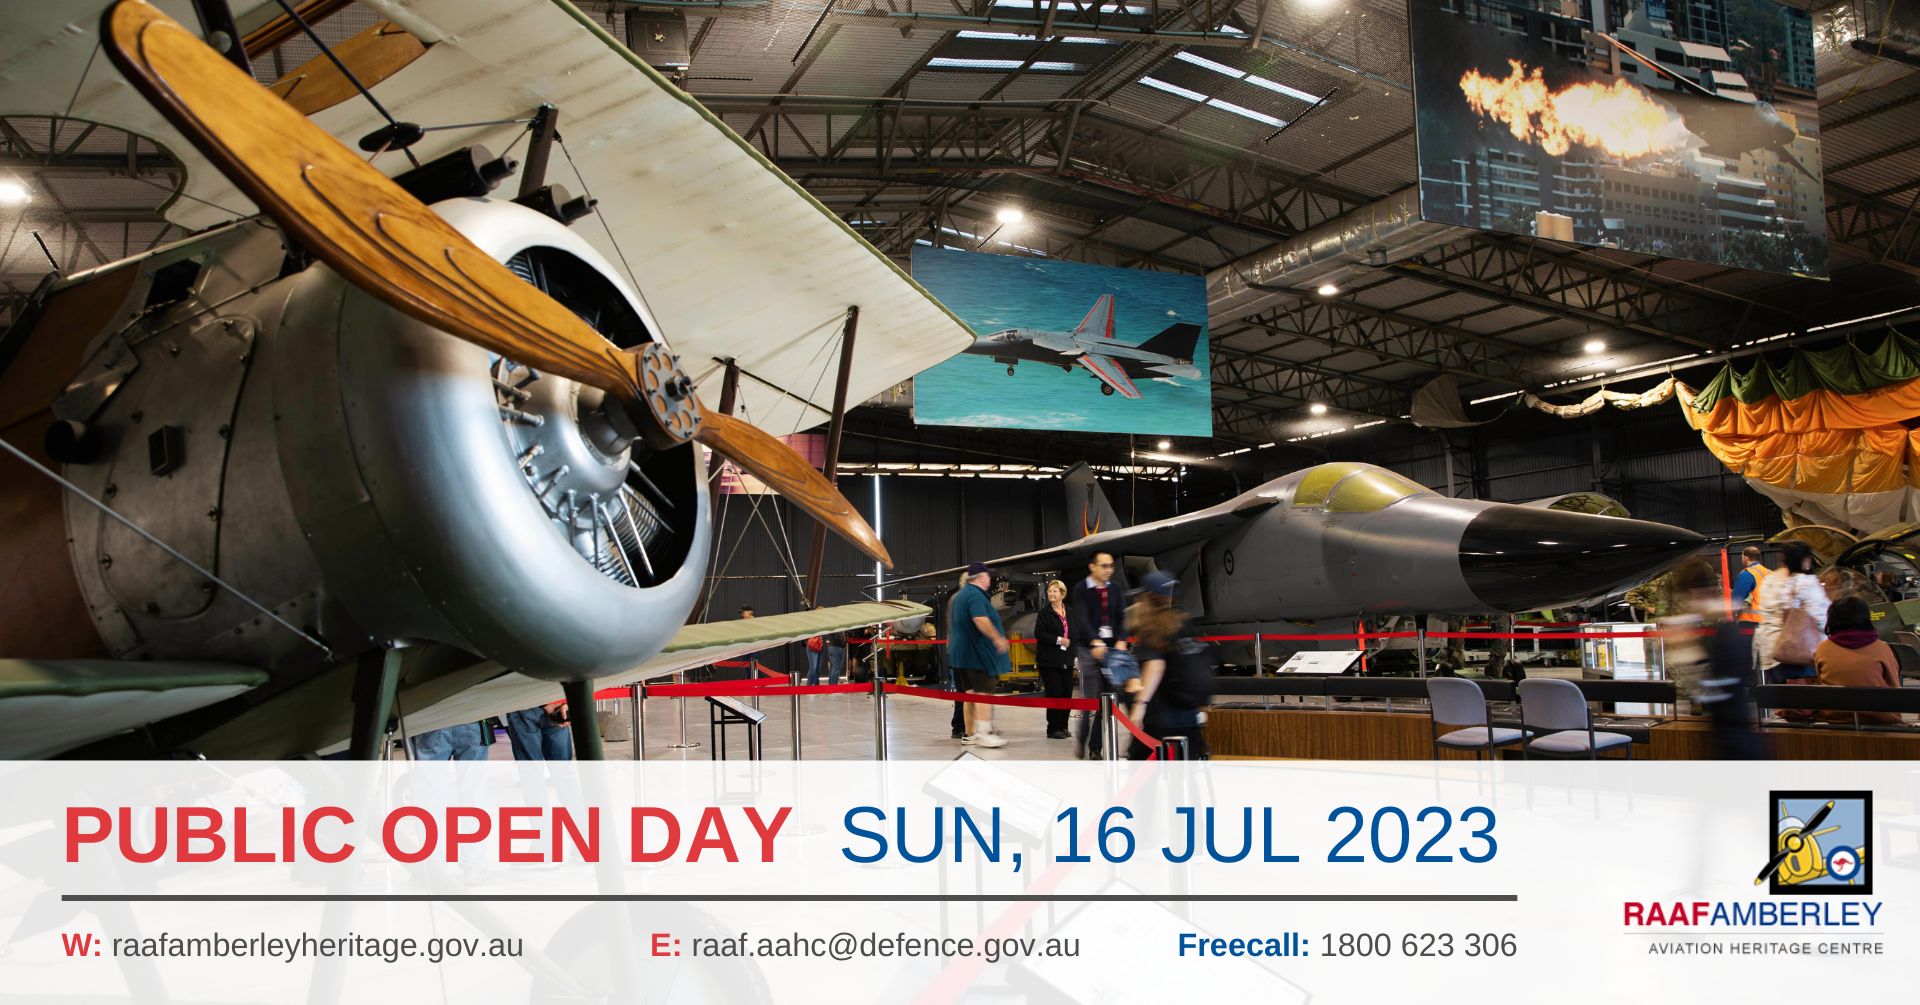 RAAF AAHC - Monthly Sunday Public Open Day - 16 Jul 2023